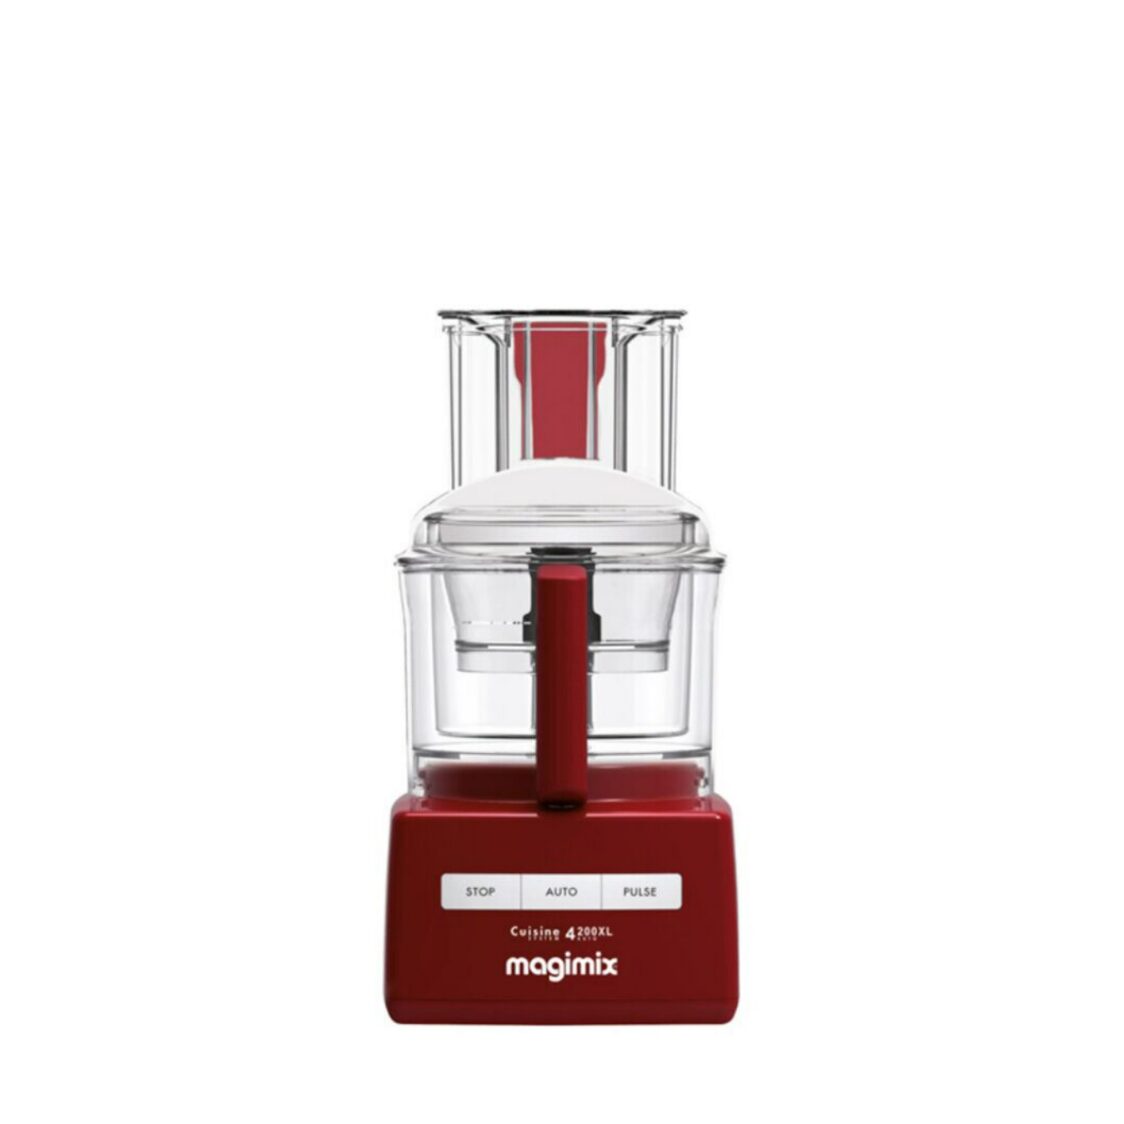 Magimix Cuisine System 4200XL Red MGMX021409